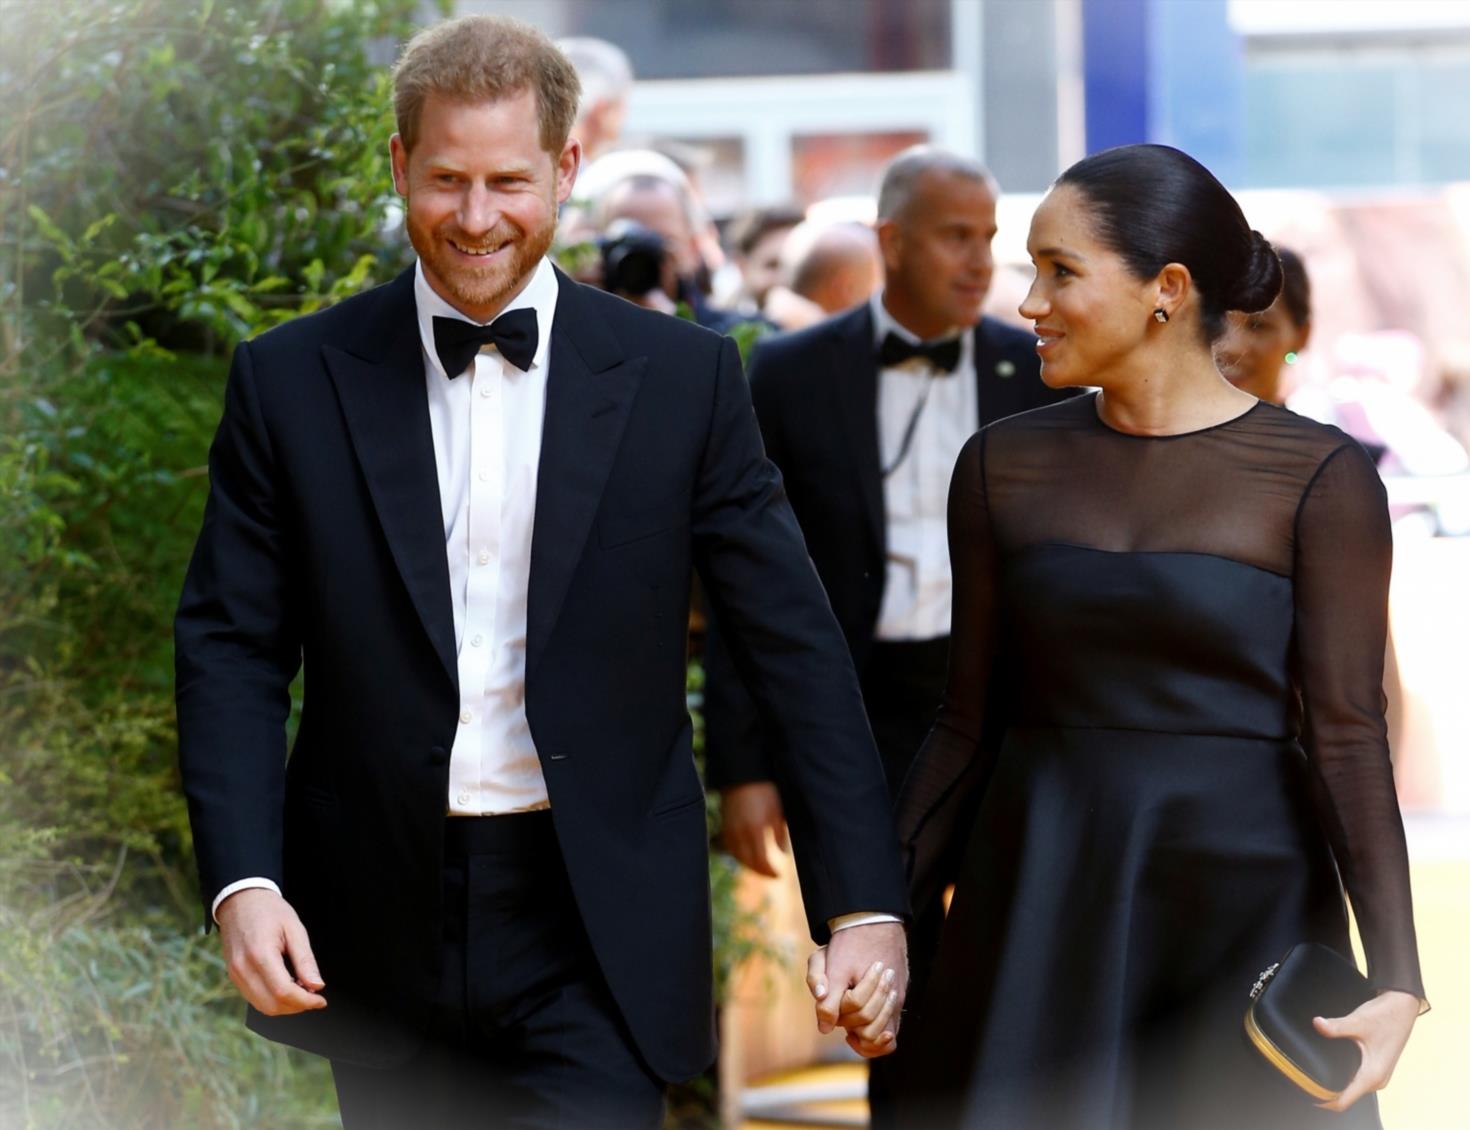 Discrepancies Emerge Over Prince Harry and Meghan Markles AllegedciHmmMy 5